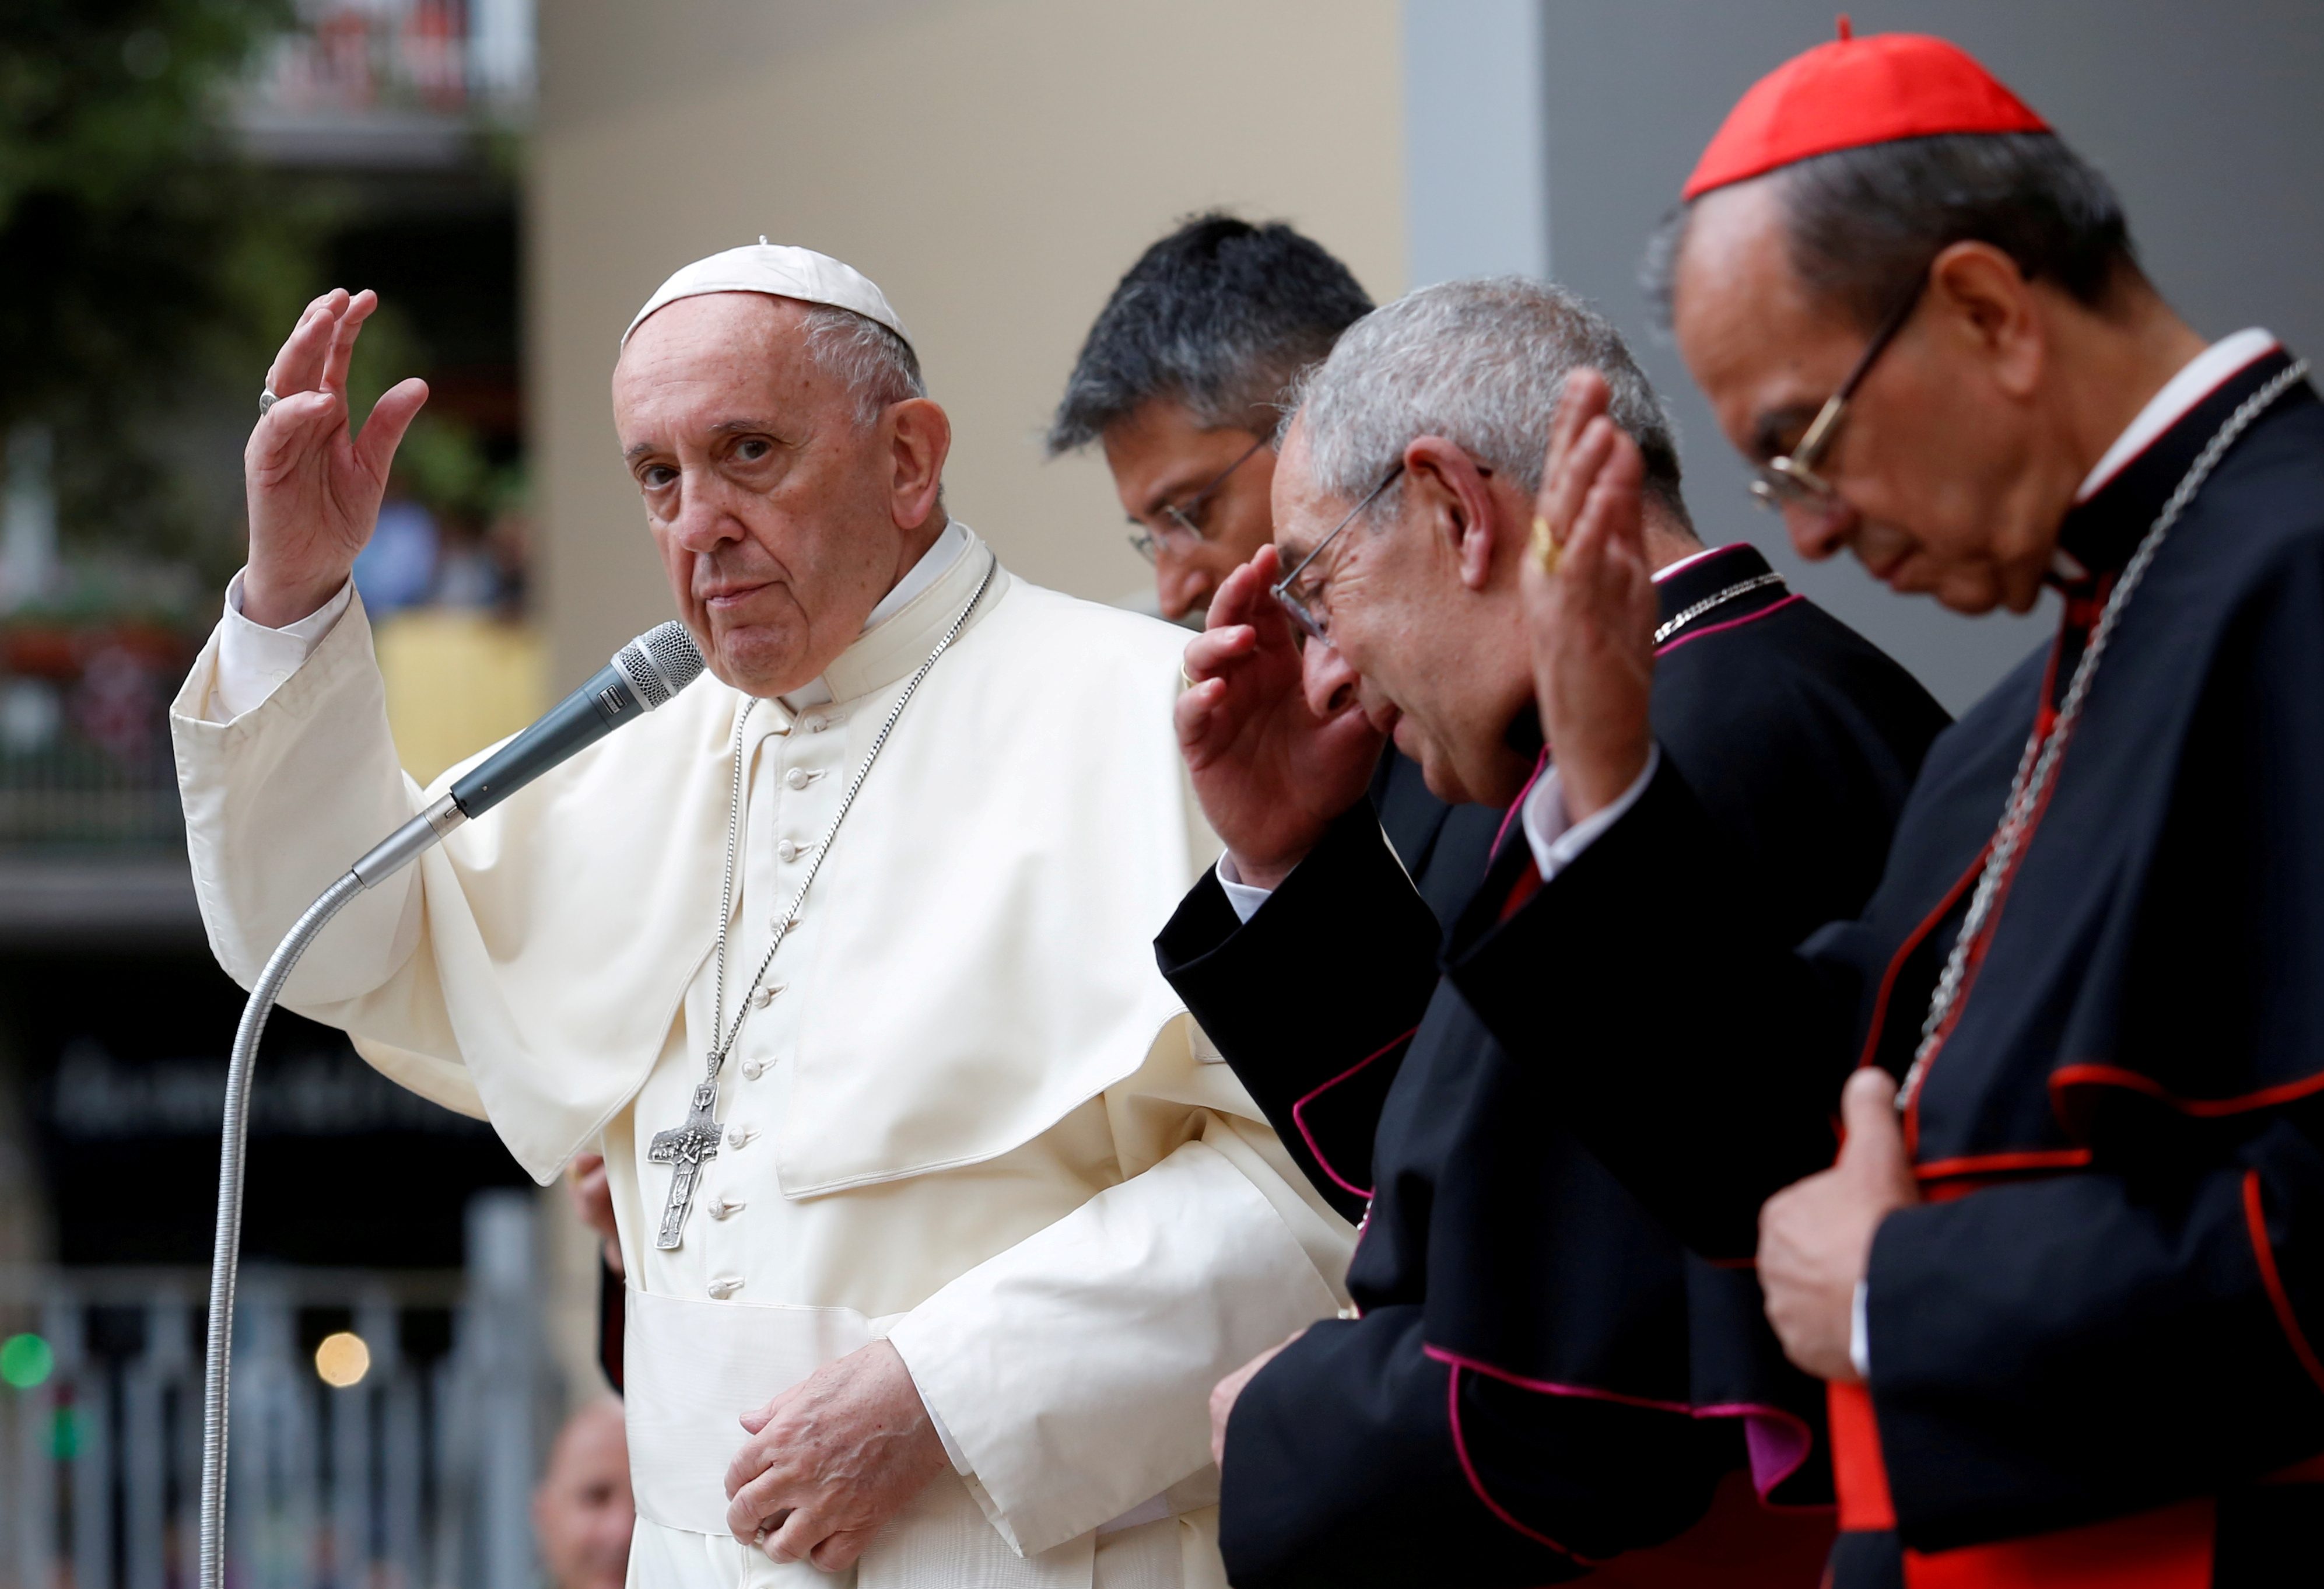 Pope orders salary cuts for cardinals, clerics, to save jobs of employees